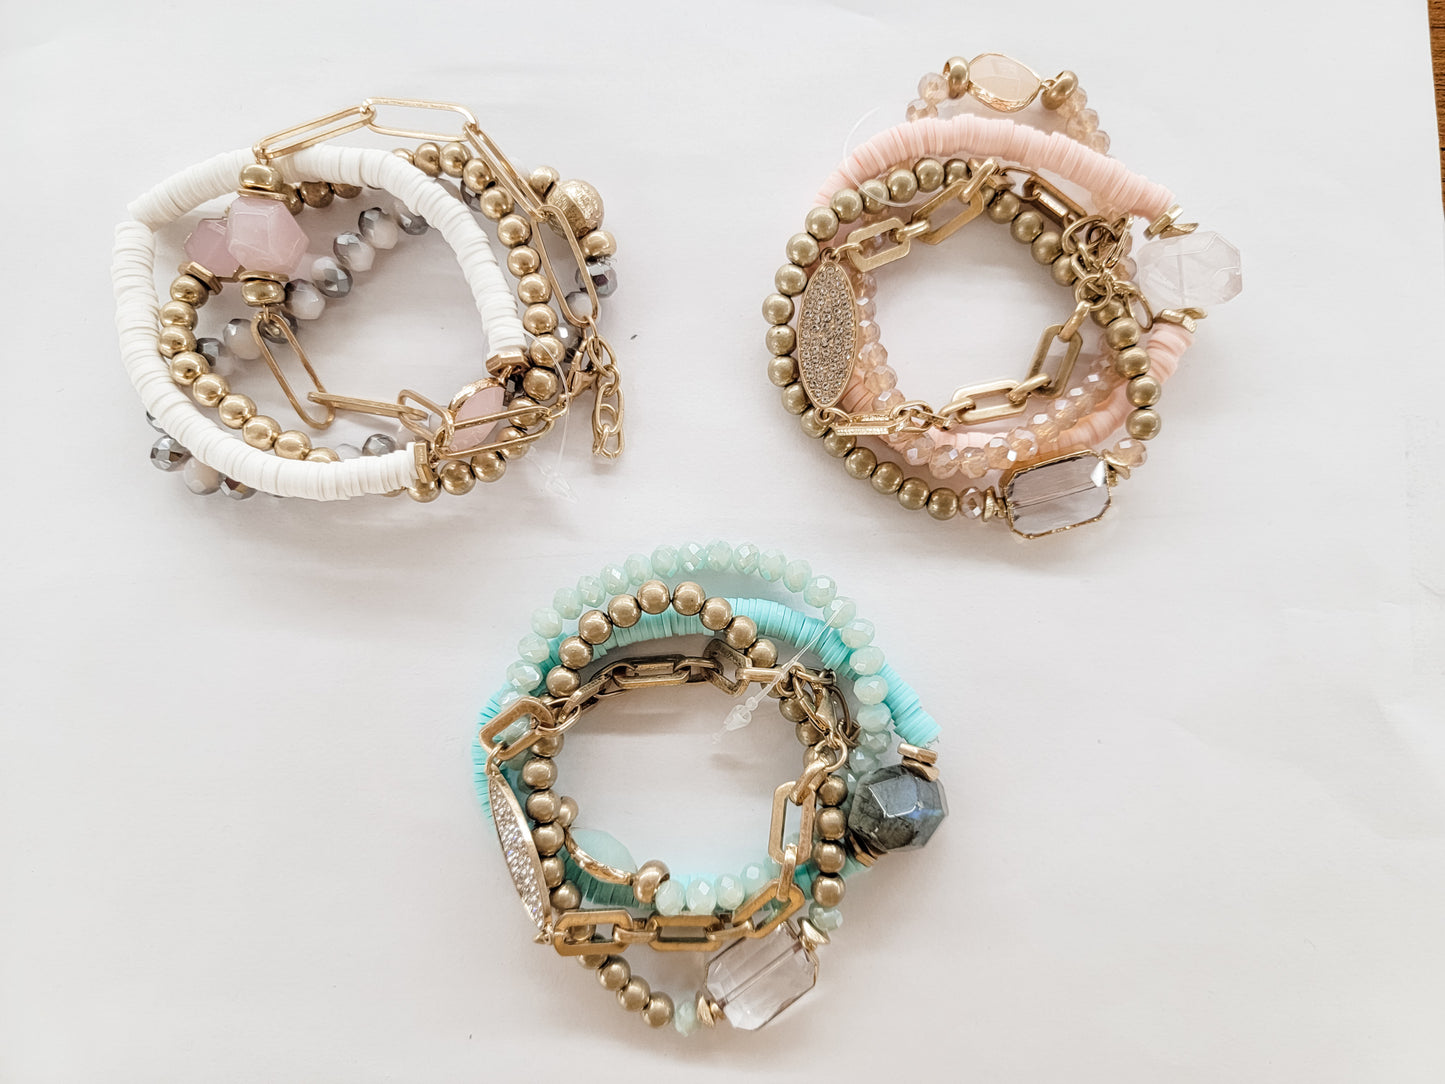 Gold, Shell, and Chain 4 Bracelet Sets